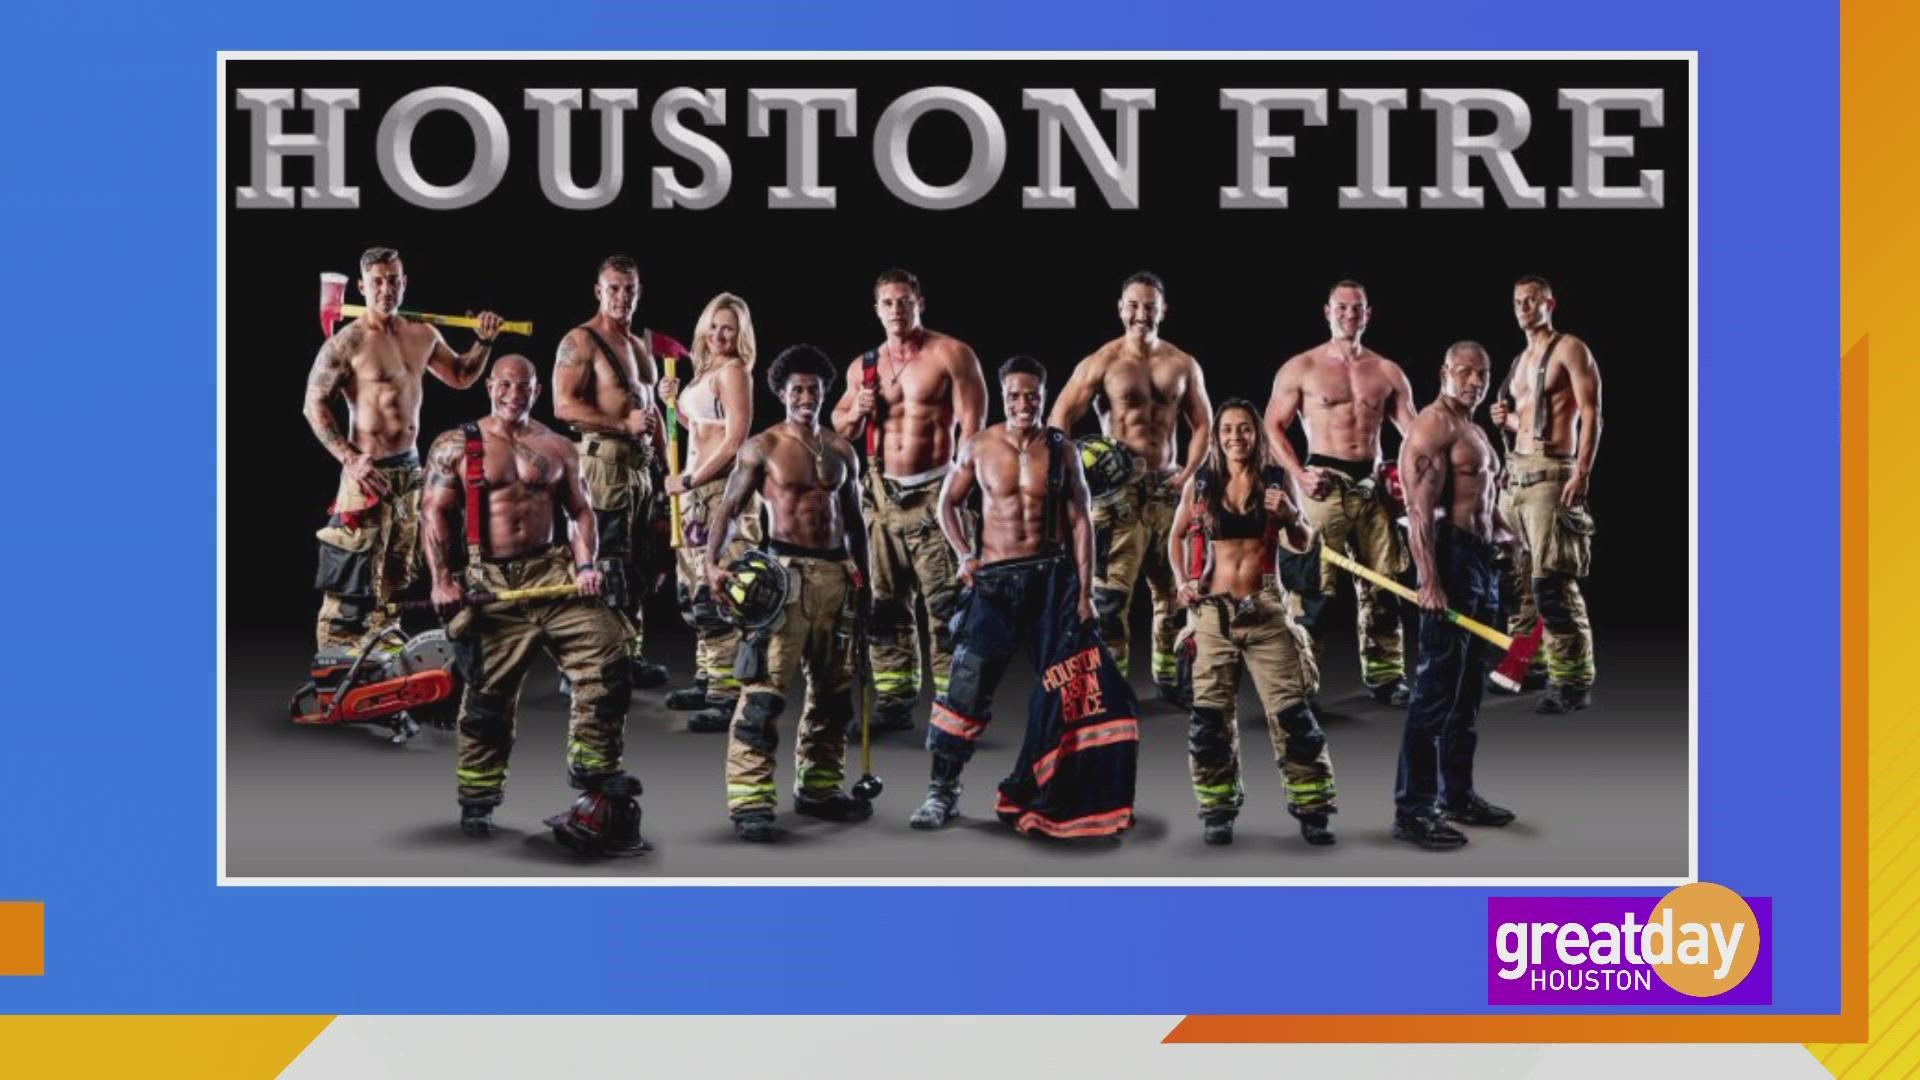 This year's calendar features 10 men and two women, marking the first time there have been male and female firefighters together in the calendar.